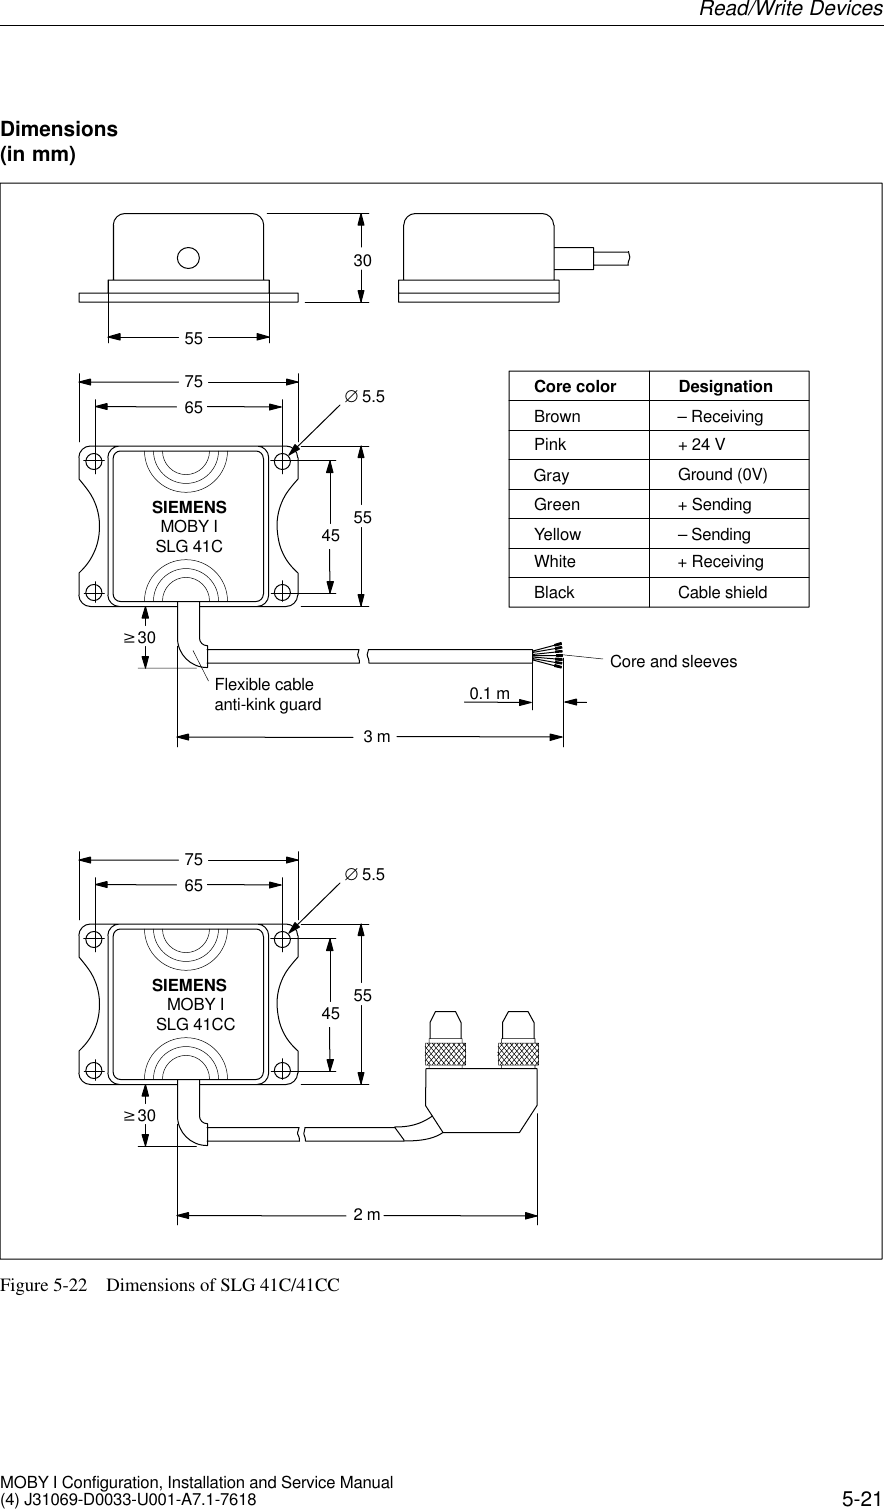 5-21MOBY I Configuration, Installation and Service Manual(4) J31069-D0033-U001-A7.1-7618∅5.545 557565w30Core and sleevesFlexible cable anti-kink guard3 m0.1 m5530SIEMENSMOBY ISLG 41C∅5.545 557565w302 mSIEMENSMOBY ISLG 41CCCore color DesignationBrown – ReceivingPink + 24 VGray Ground (0V)Green + SendingYellow – SendingWhite + ReceivingBlack Cable shieldFigure 5-22 Dimensions of SLG 41C/41CCDimensions (in mm)Read/Write Devices